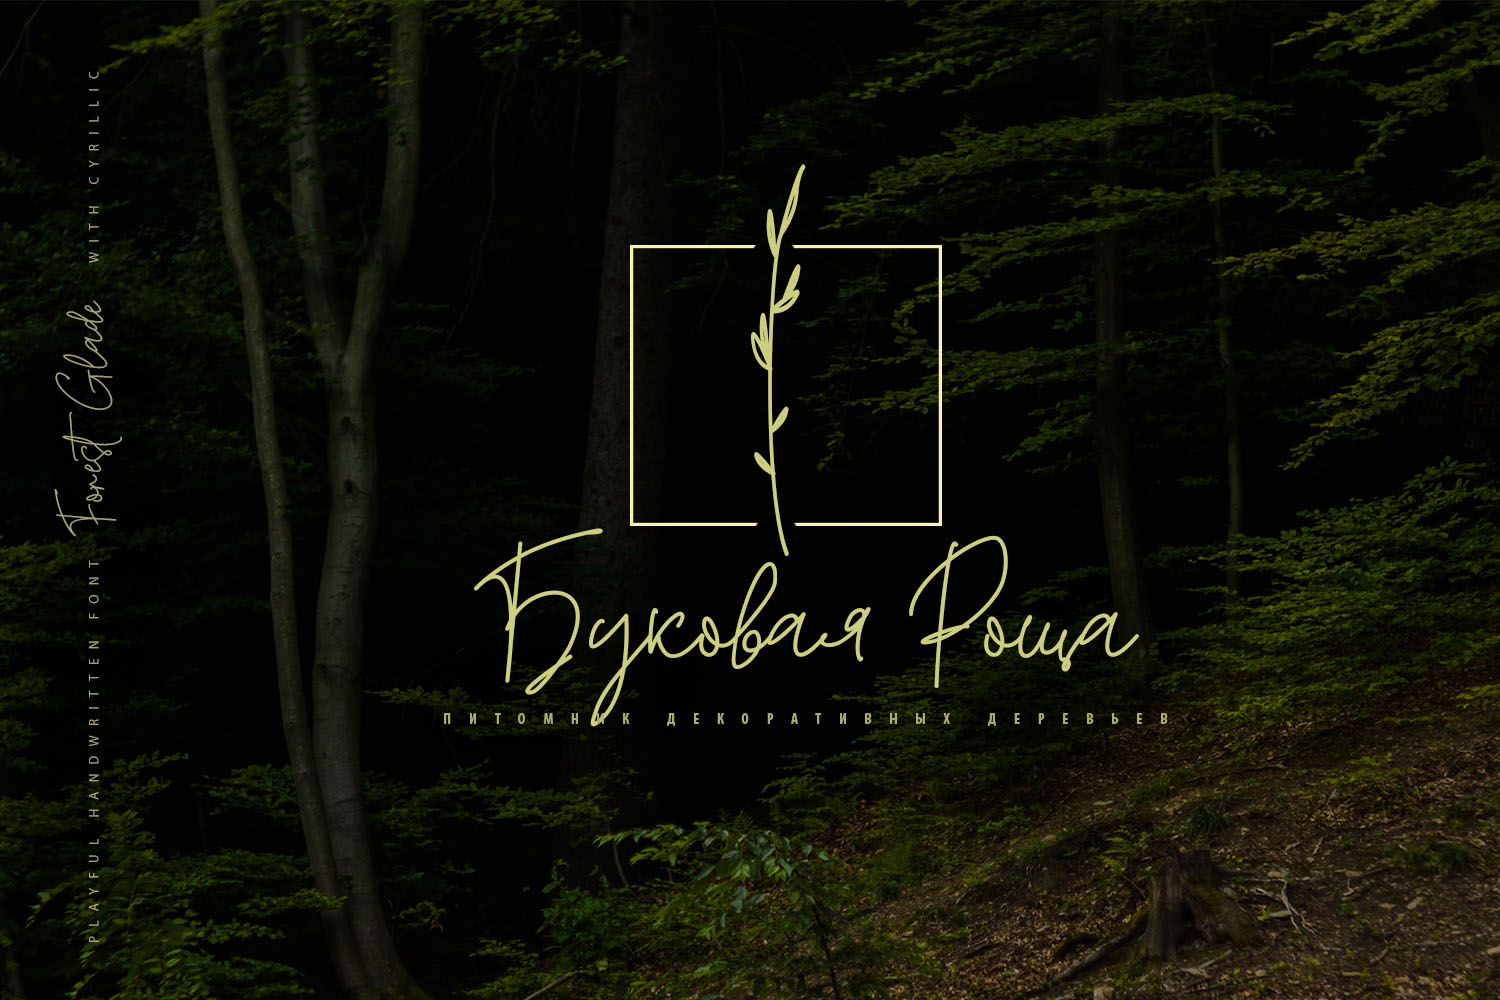 Forest Glade Playful Script Font Cyrillic + Extras.